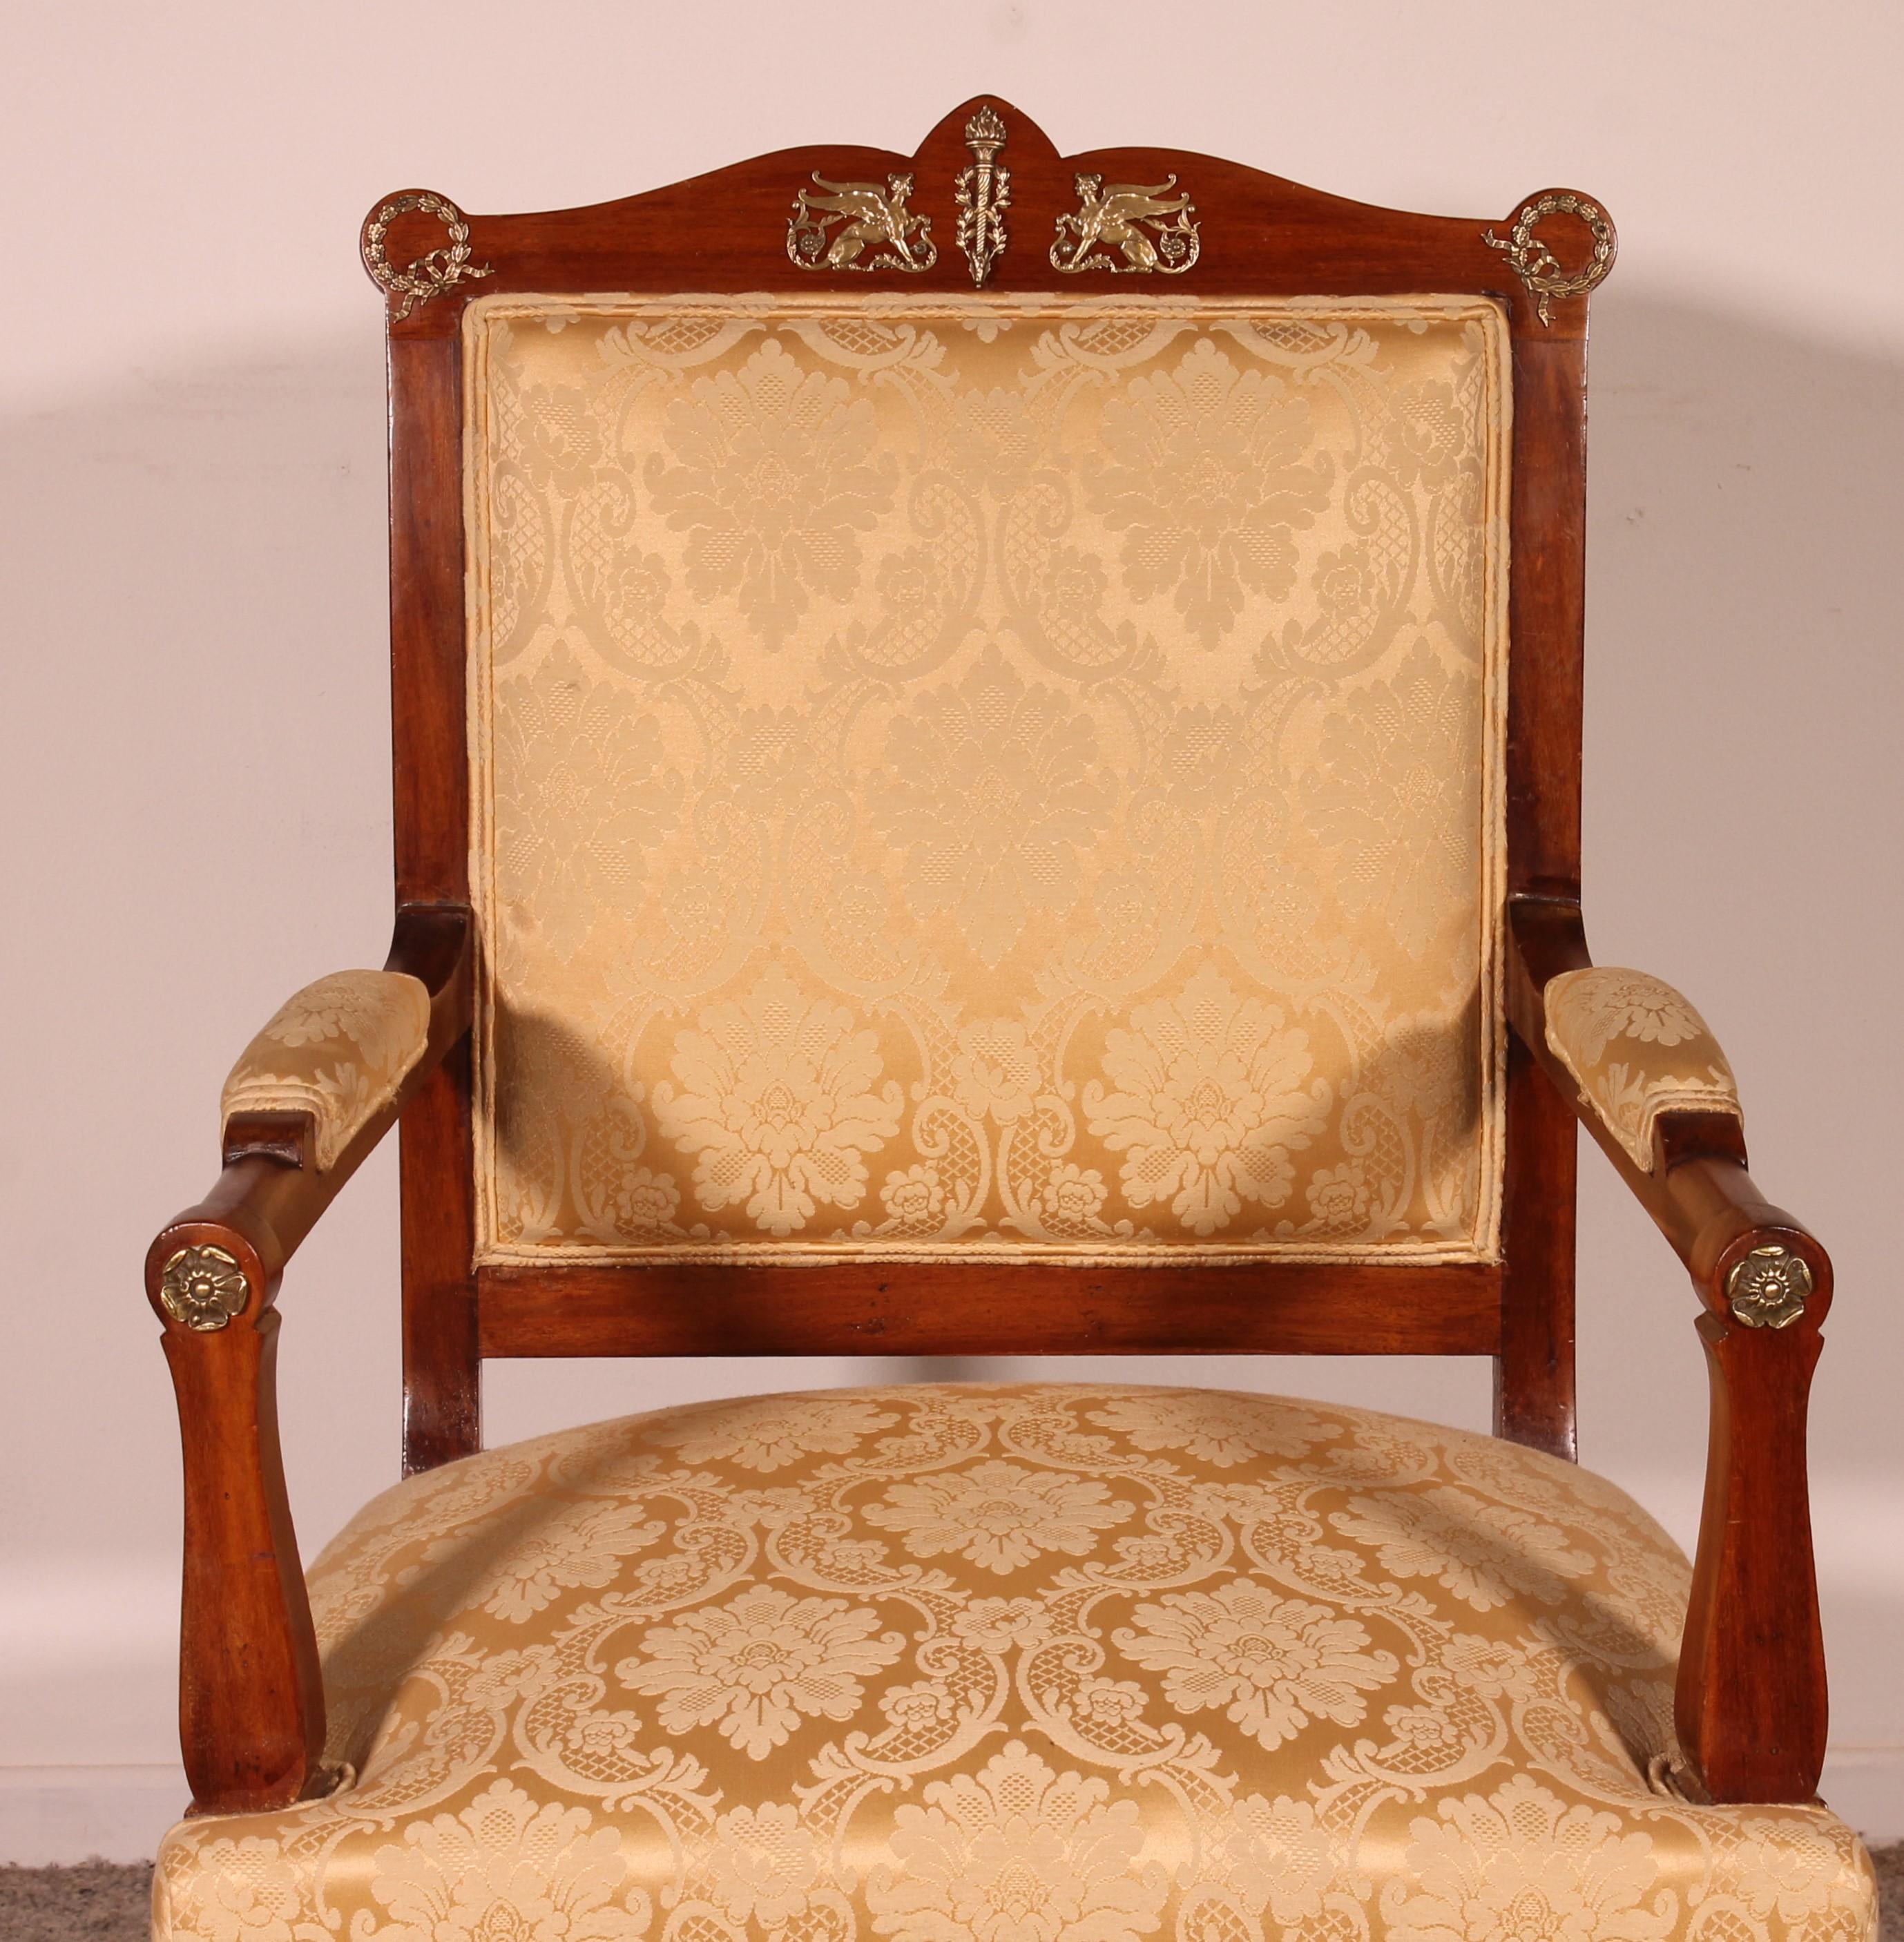 Lovely empire style mahogany armchair from the end of the 19th century
Very good quality bronze and beautiful mahogany
Very beautiful armchair which can be used as a library chair or office armchair
seat height 44cm
In superb condition.